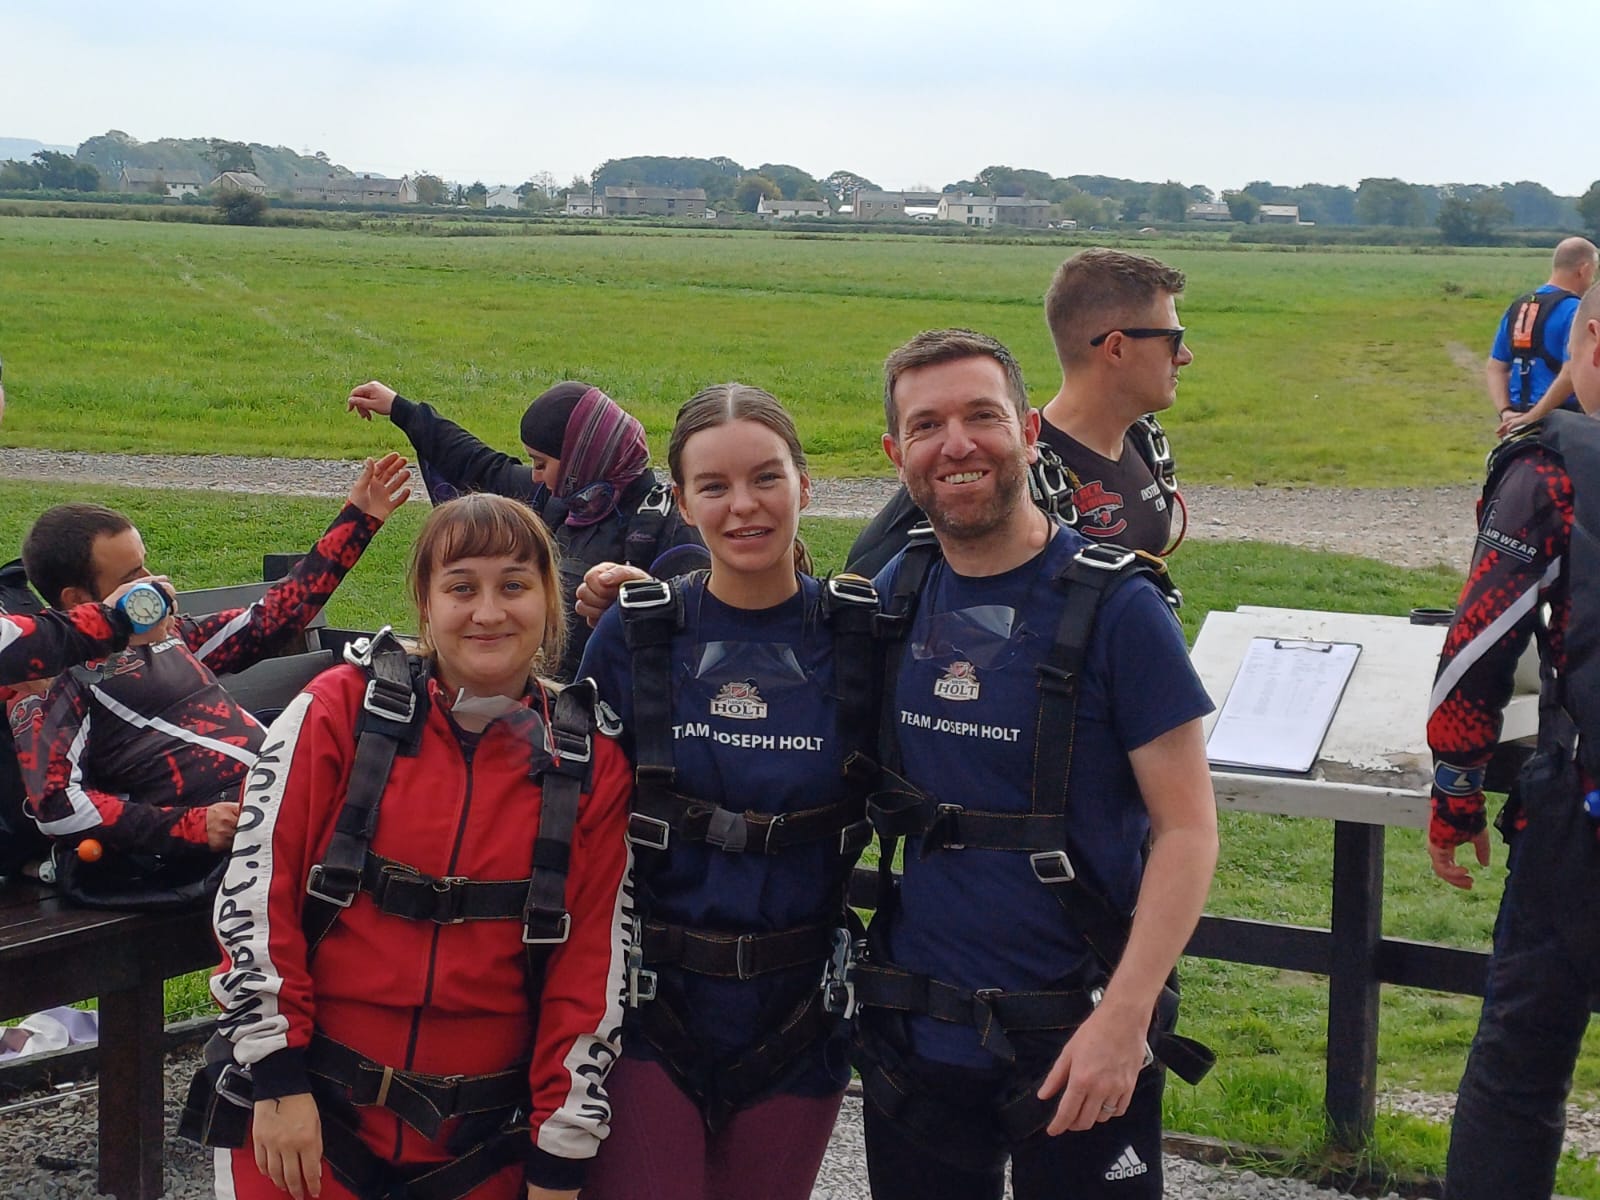 Kirsty, Emily and Stuart from our Telesales and Commercial Team did a sponsored skydive to raise money for The Christie